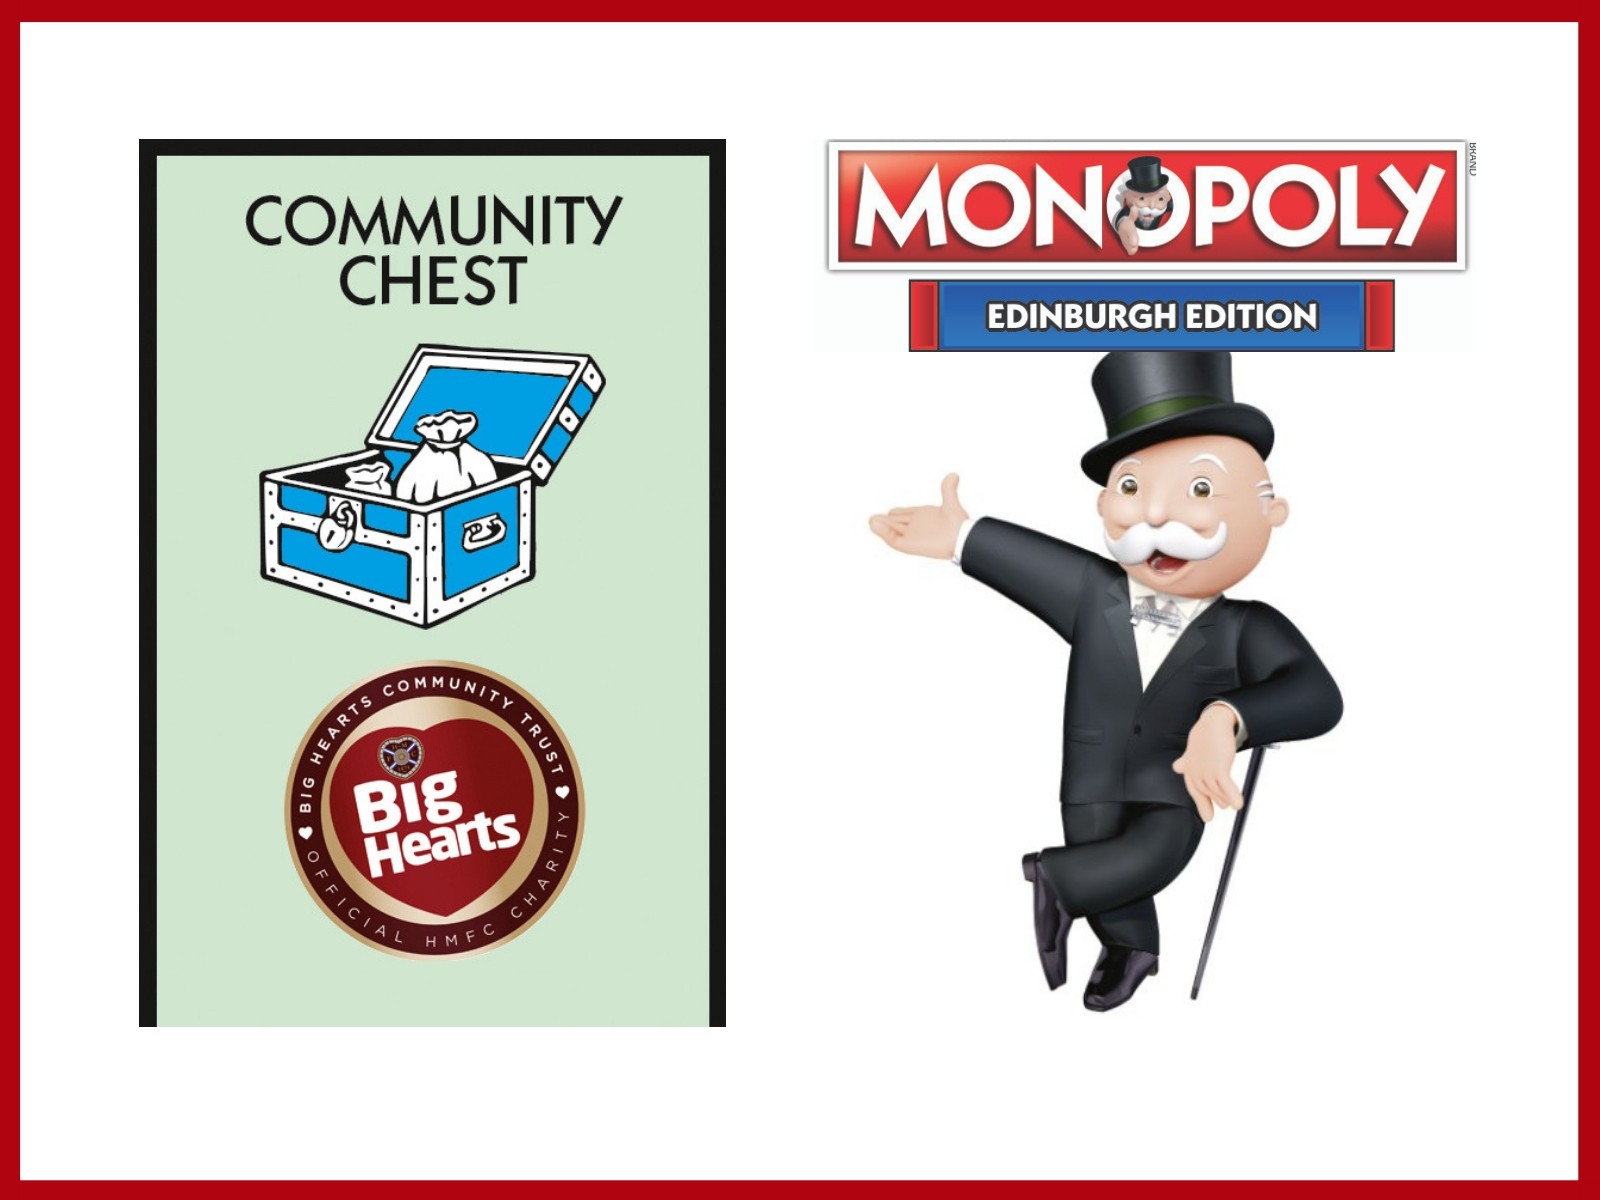  » Big Hearts to feature in the new Edinburgh Monopoly!